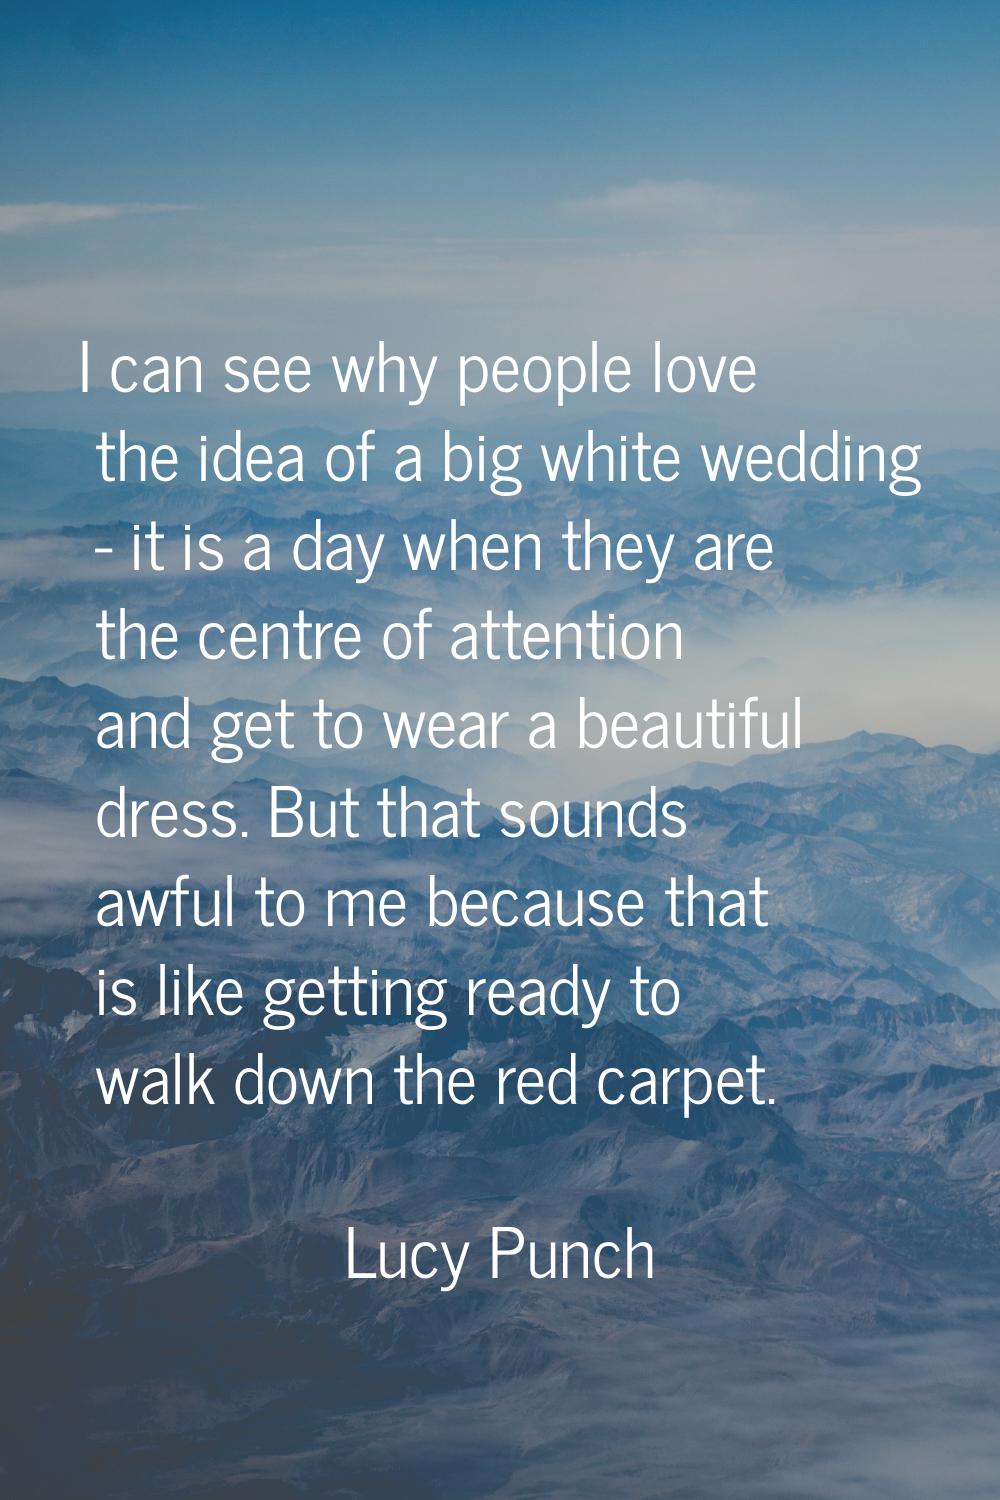 I can see why people love the idea of a big white wedding - it is a day when they are the centre of